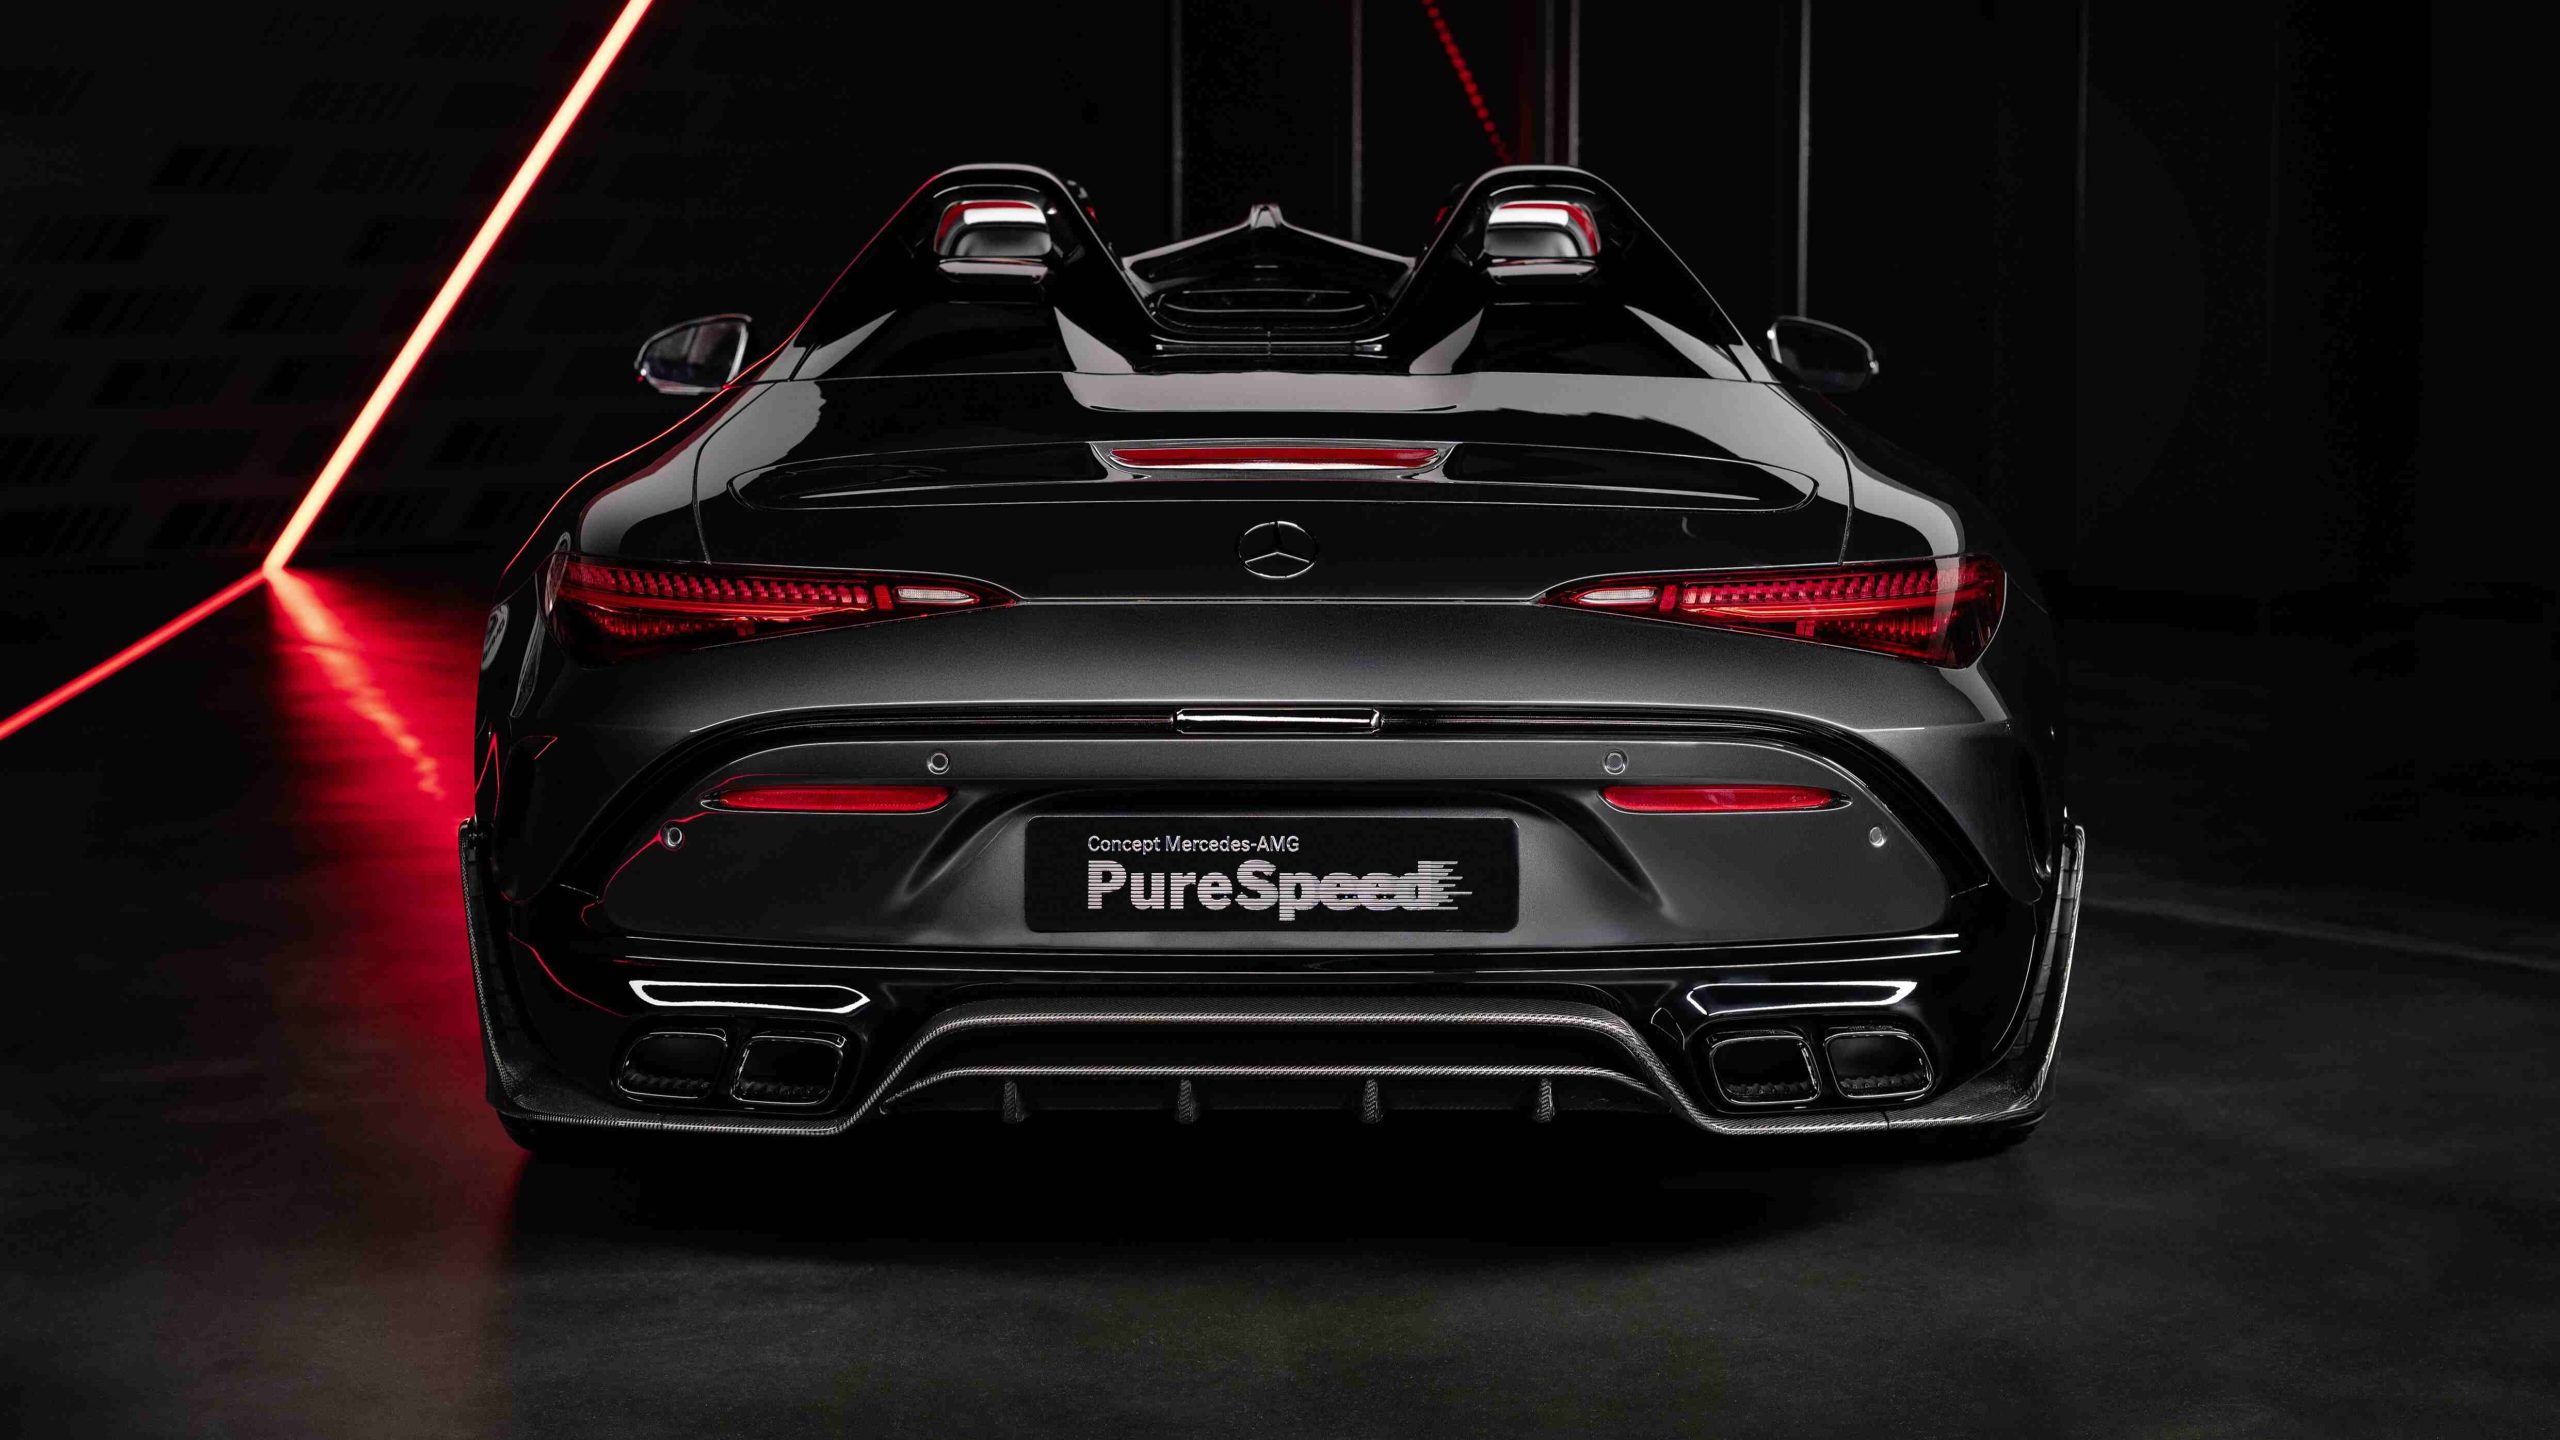 The Rear Profile Of The Mercedes-AMG PureSpeed Concept Car